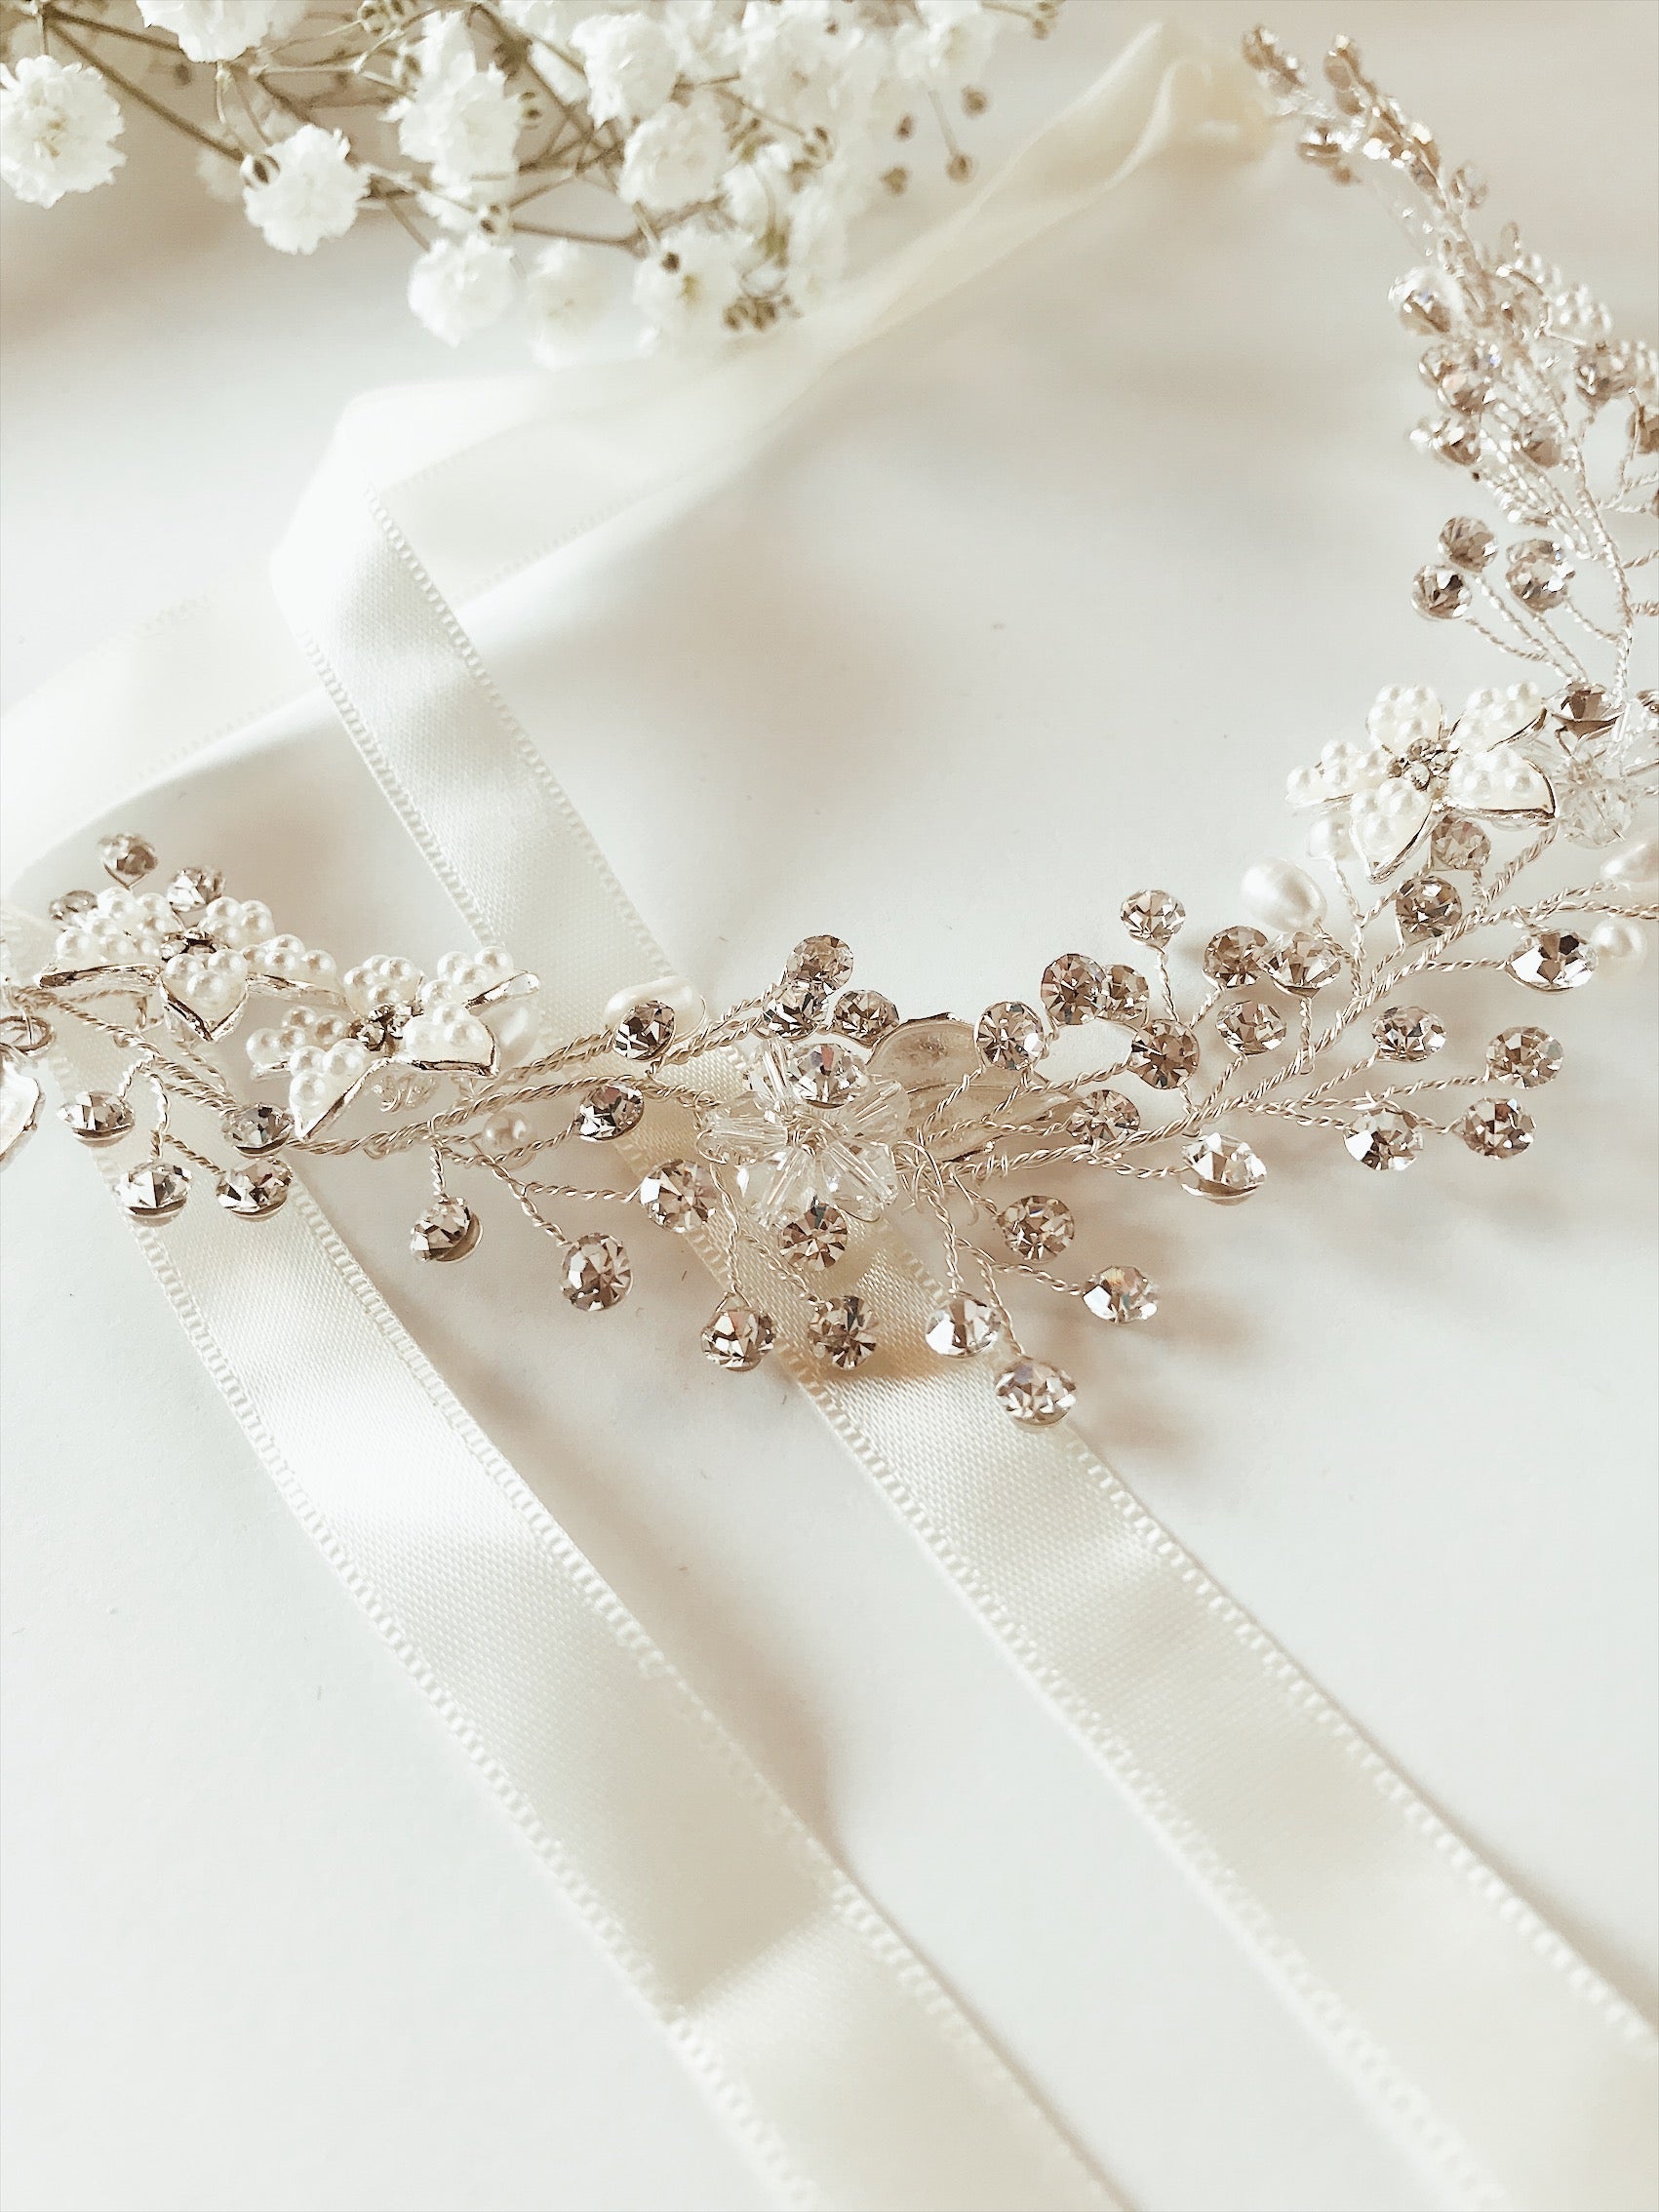 Pearl and crystal silver bridal hair vine and wedding flower crown from Lauren Elaine Accessories